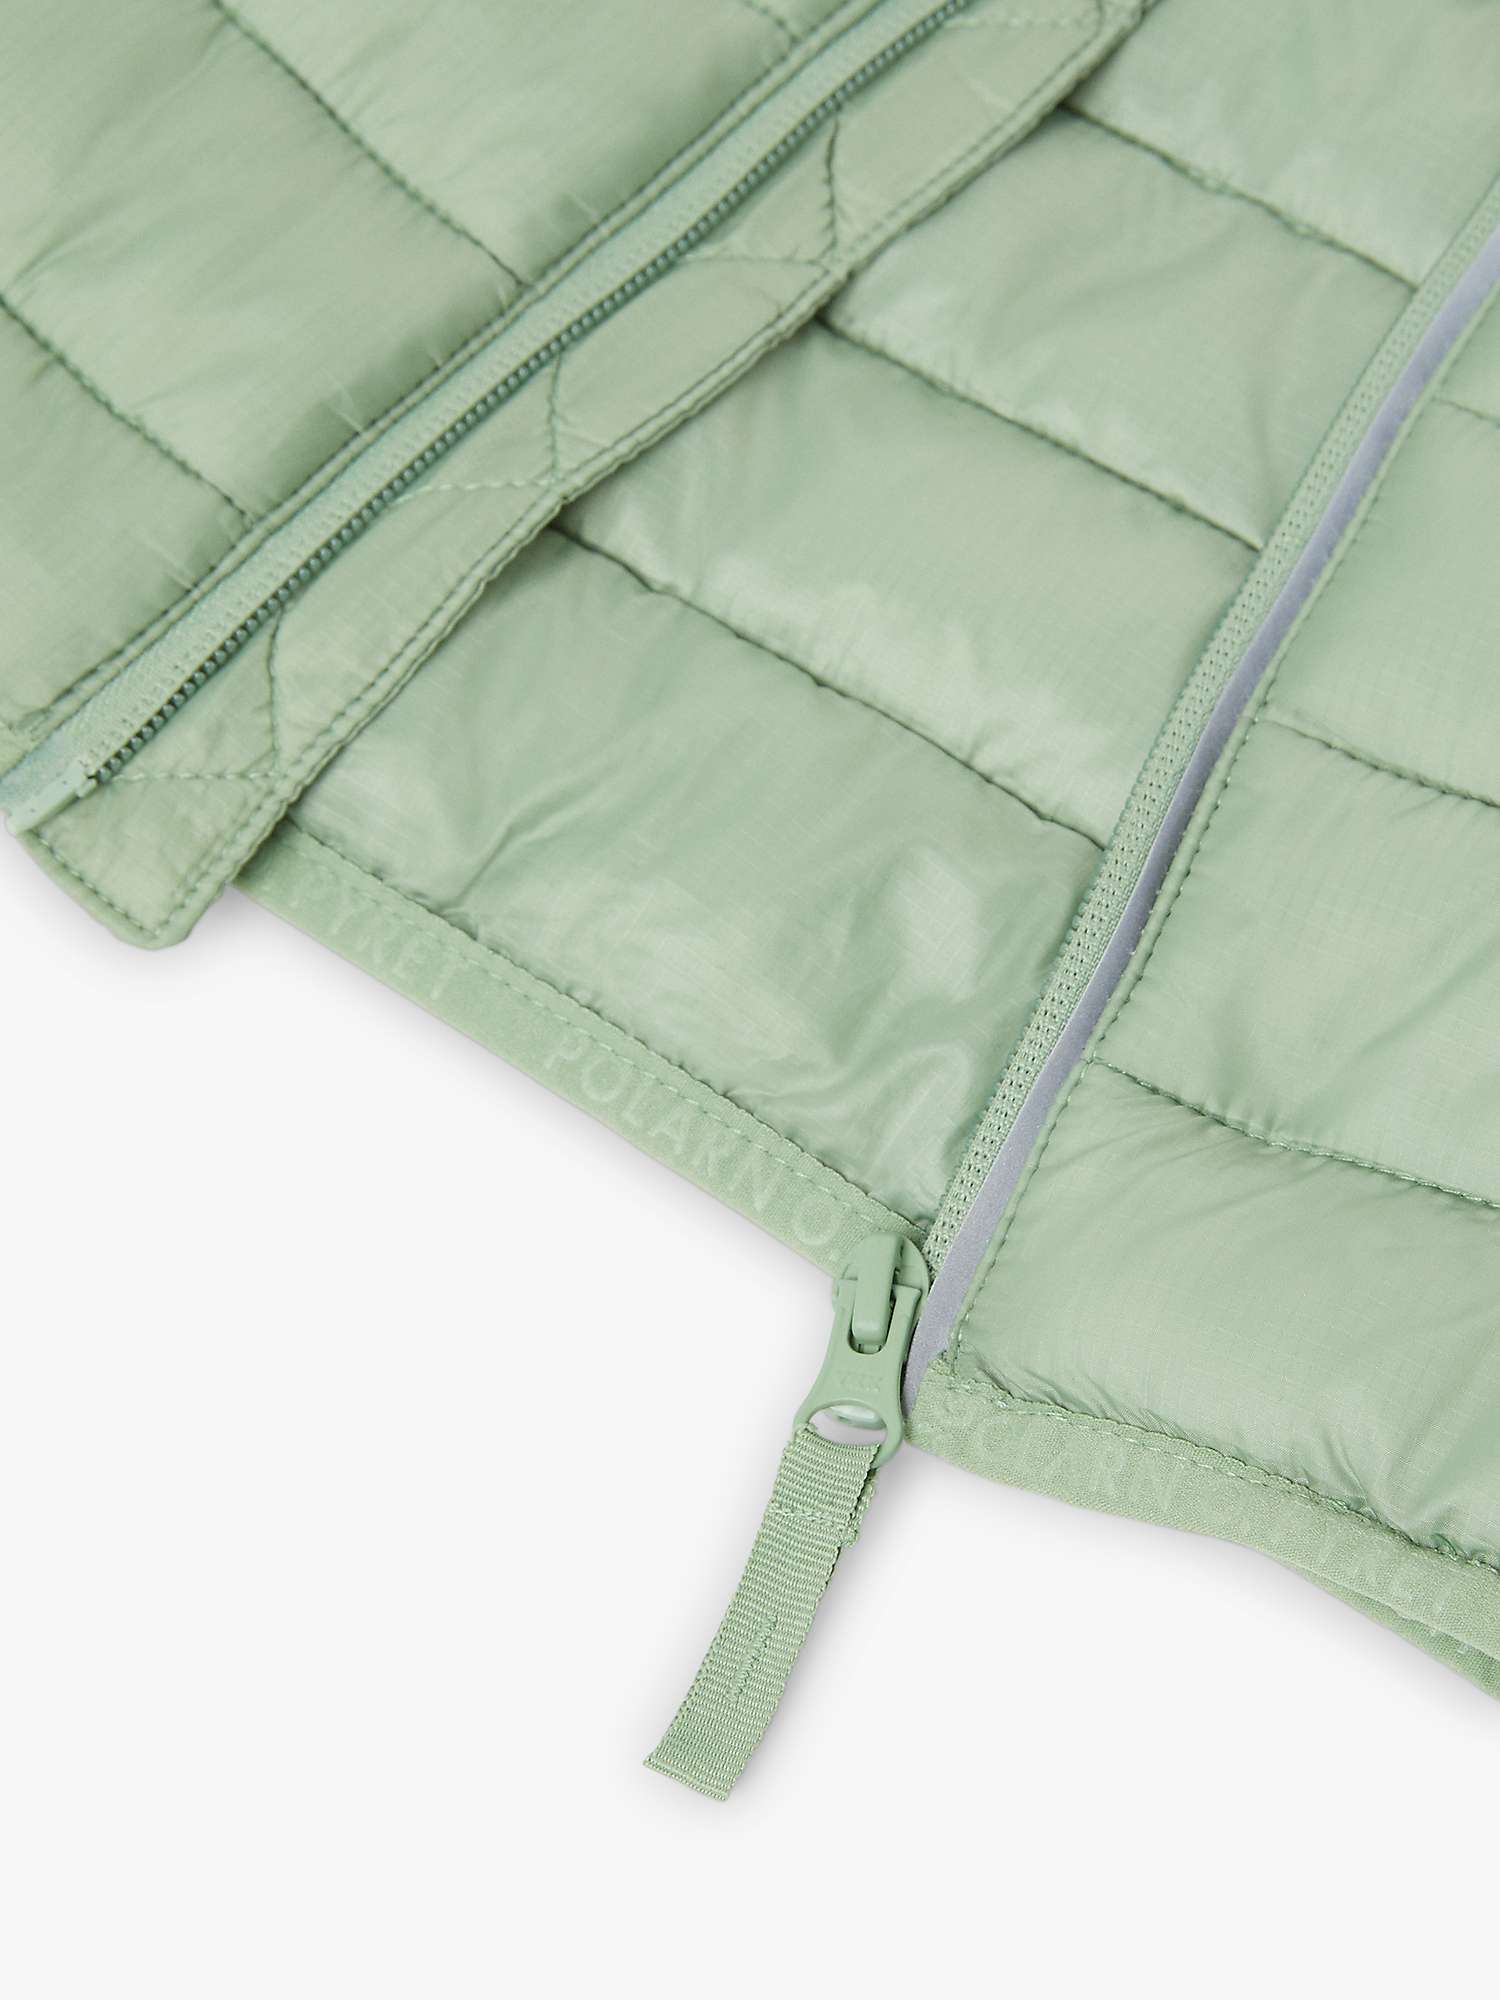 Buy Polarn O. Pyret Kids' Recycled Water Repellent Quilted Jacket, Green Online at johnlewis.com